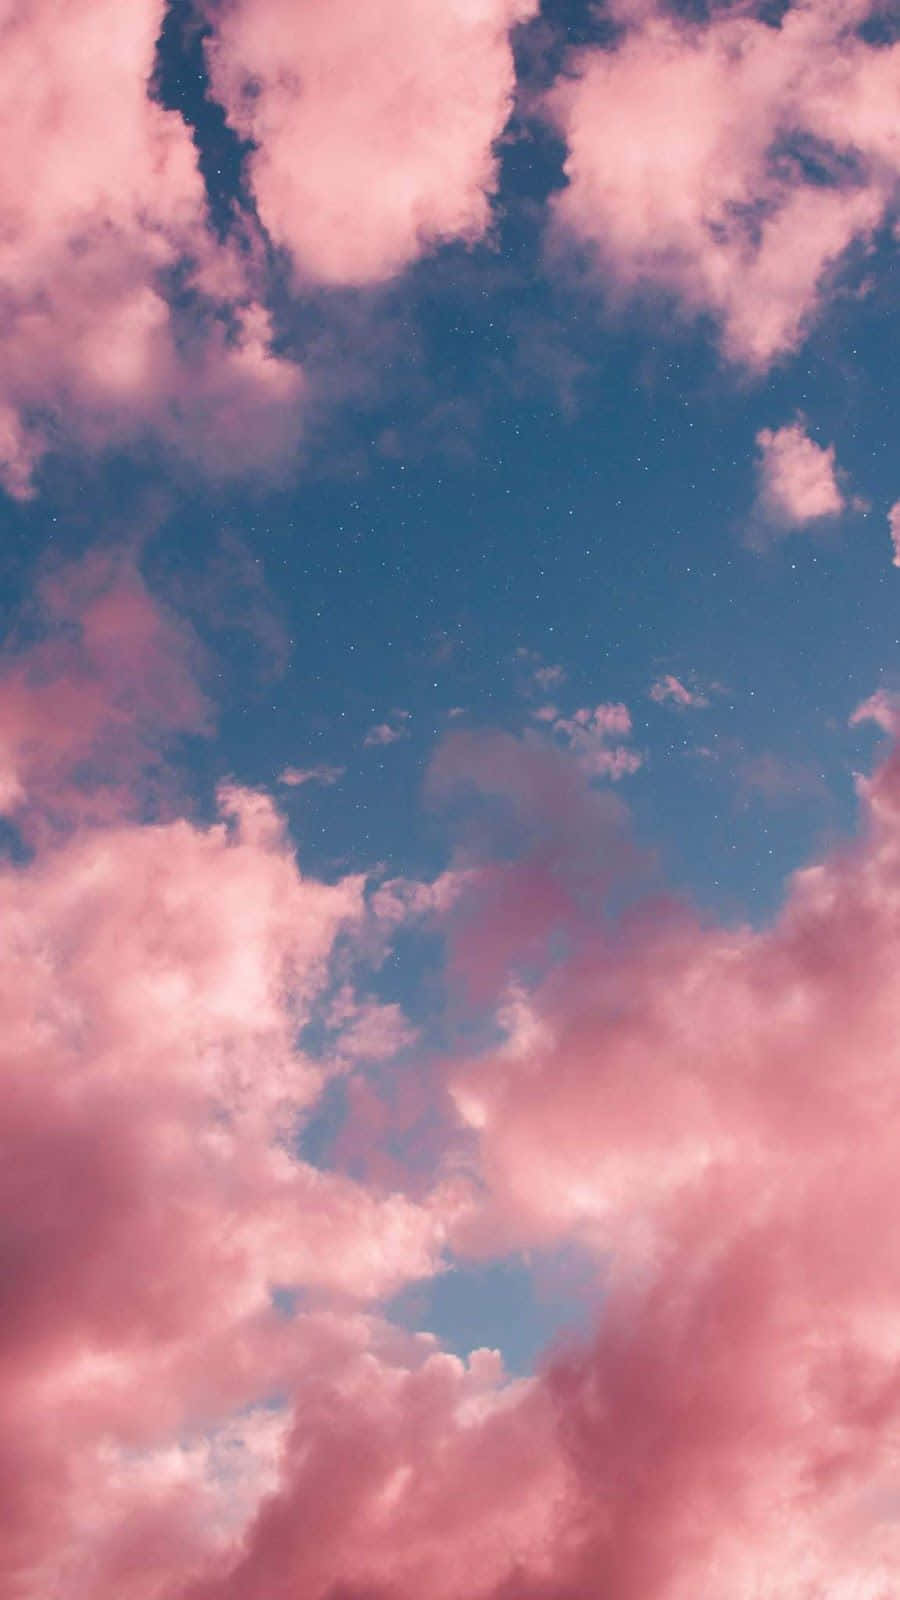 Pink Sky Cotton Candy Clouds Pictures